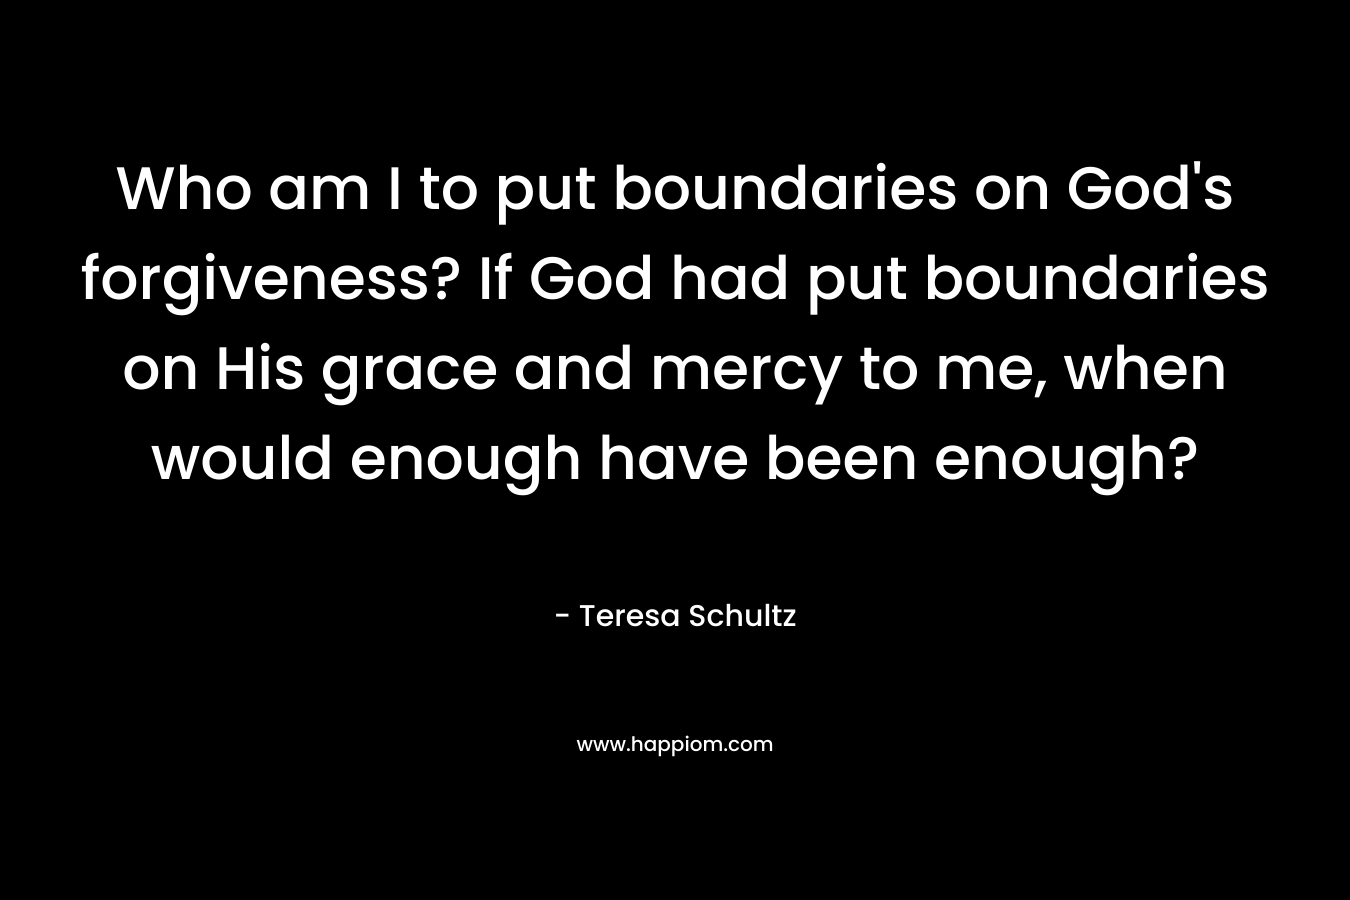 Who am I to put boundaries on God's forgiveness? If God had put boundaries on His grace and mercy to me, when would enough have been enough?